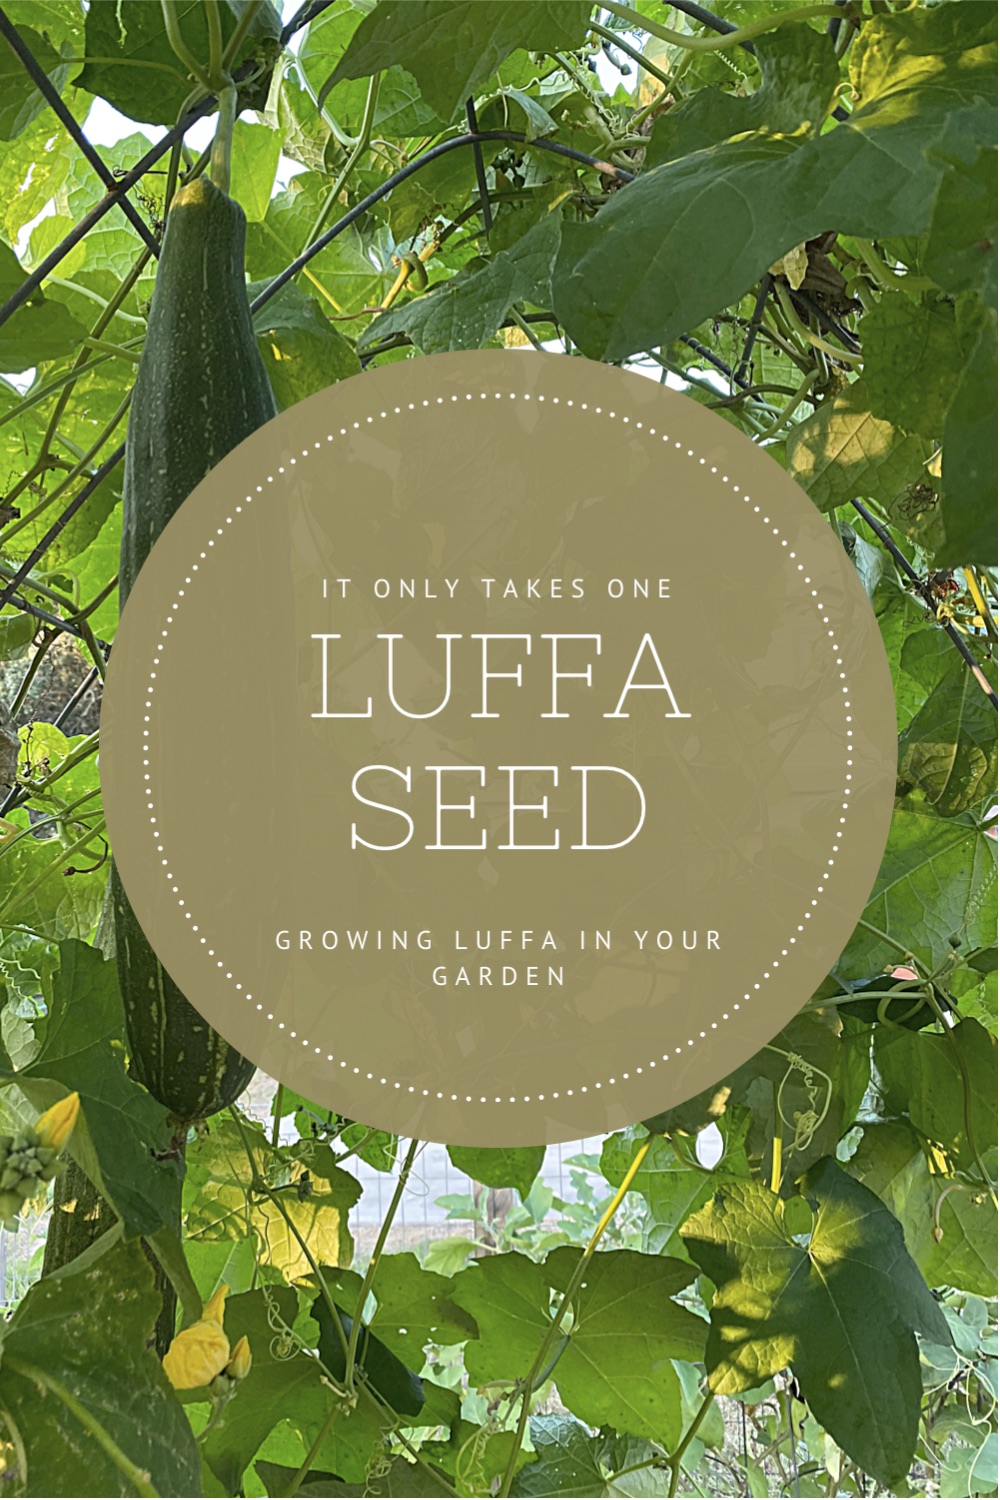 You only need one luffa seed